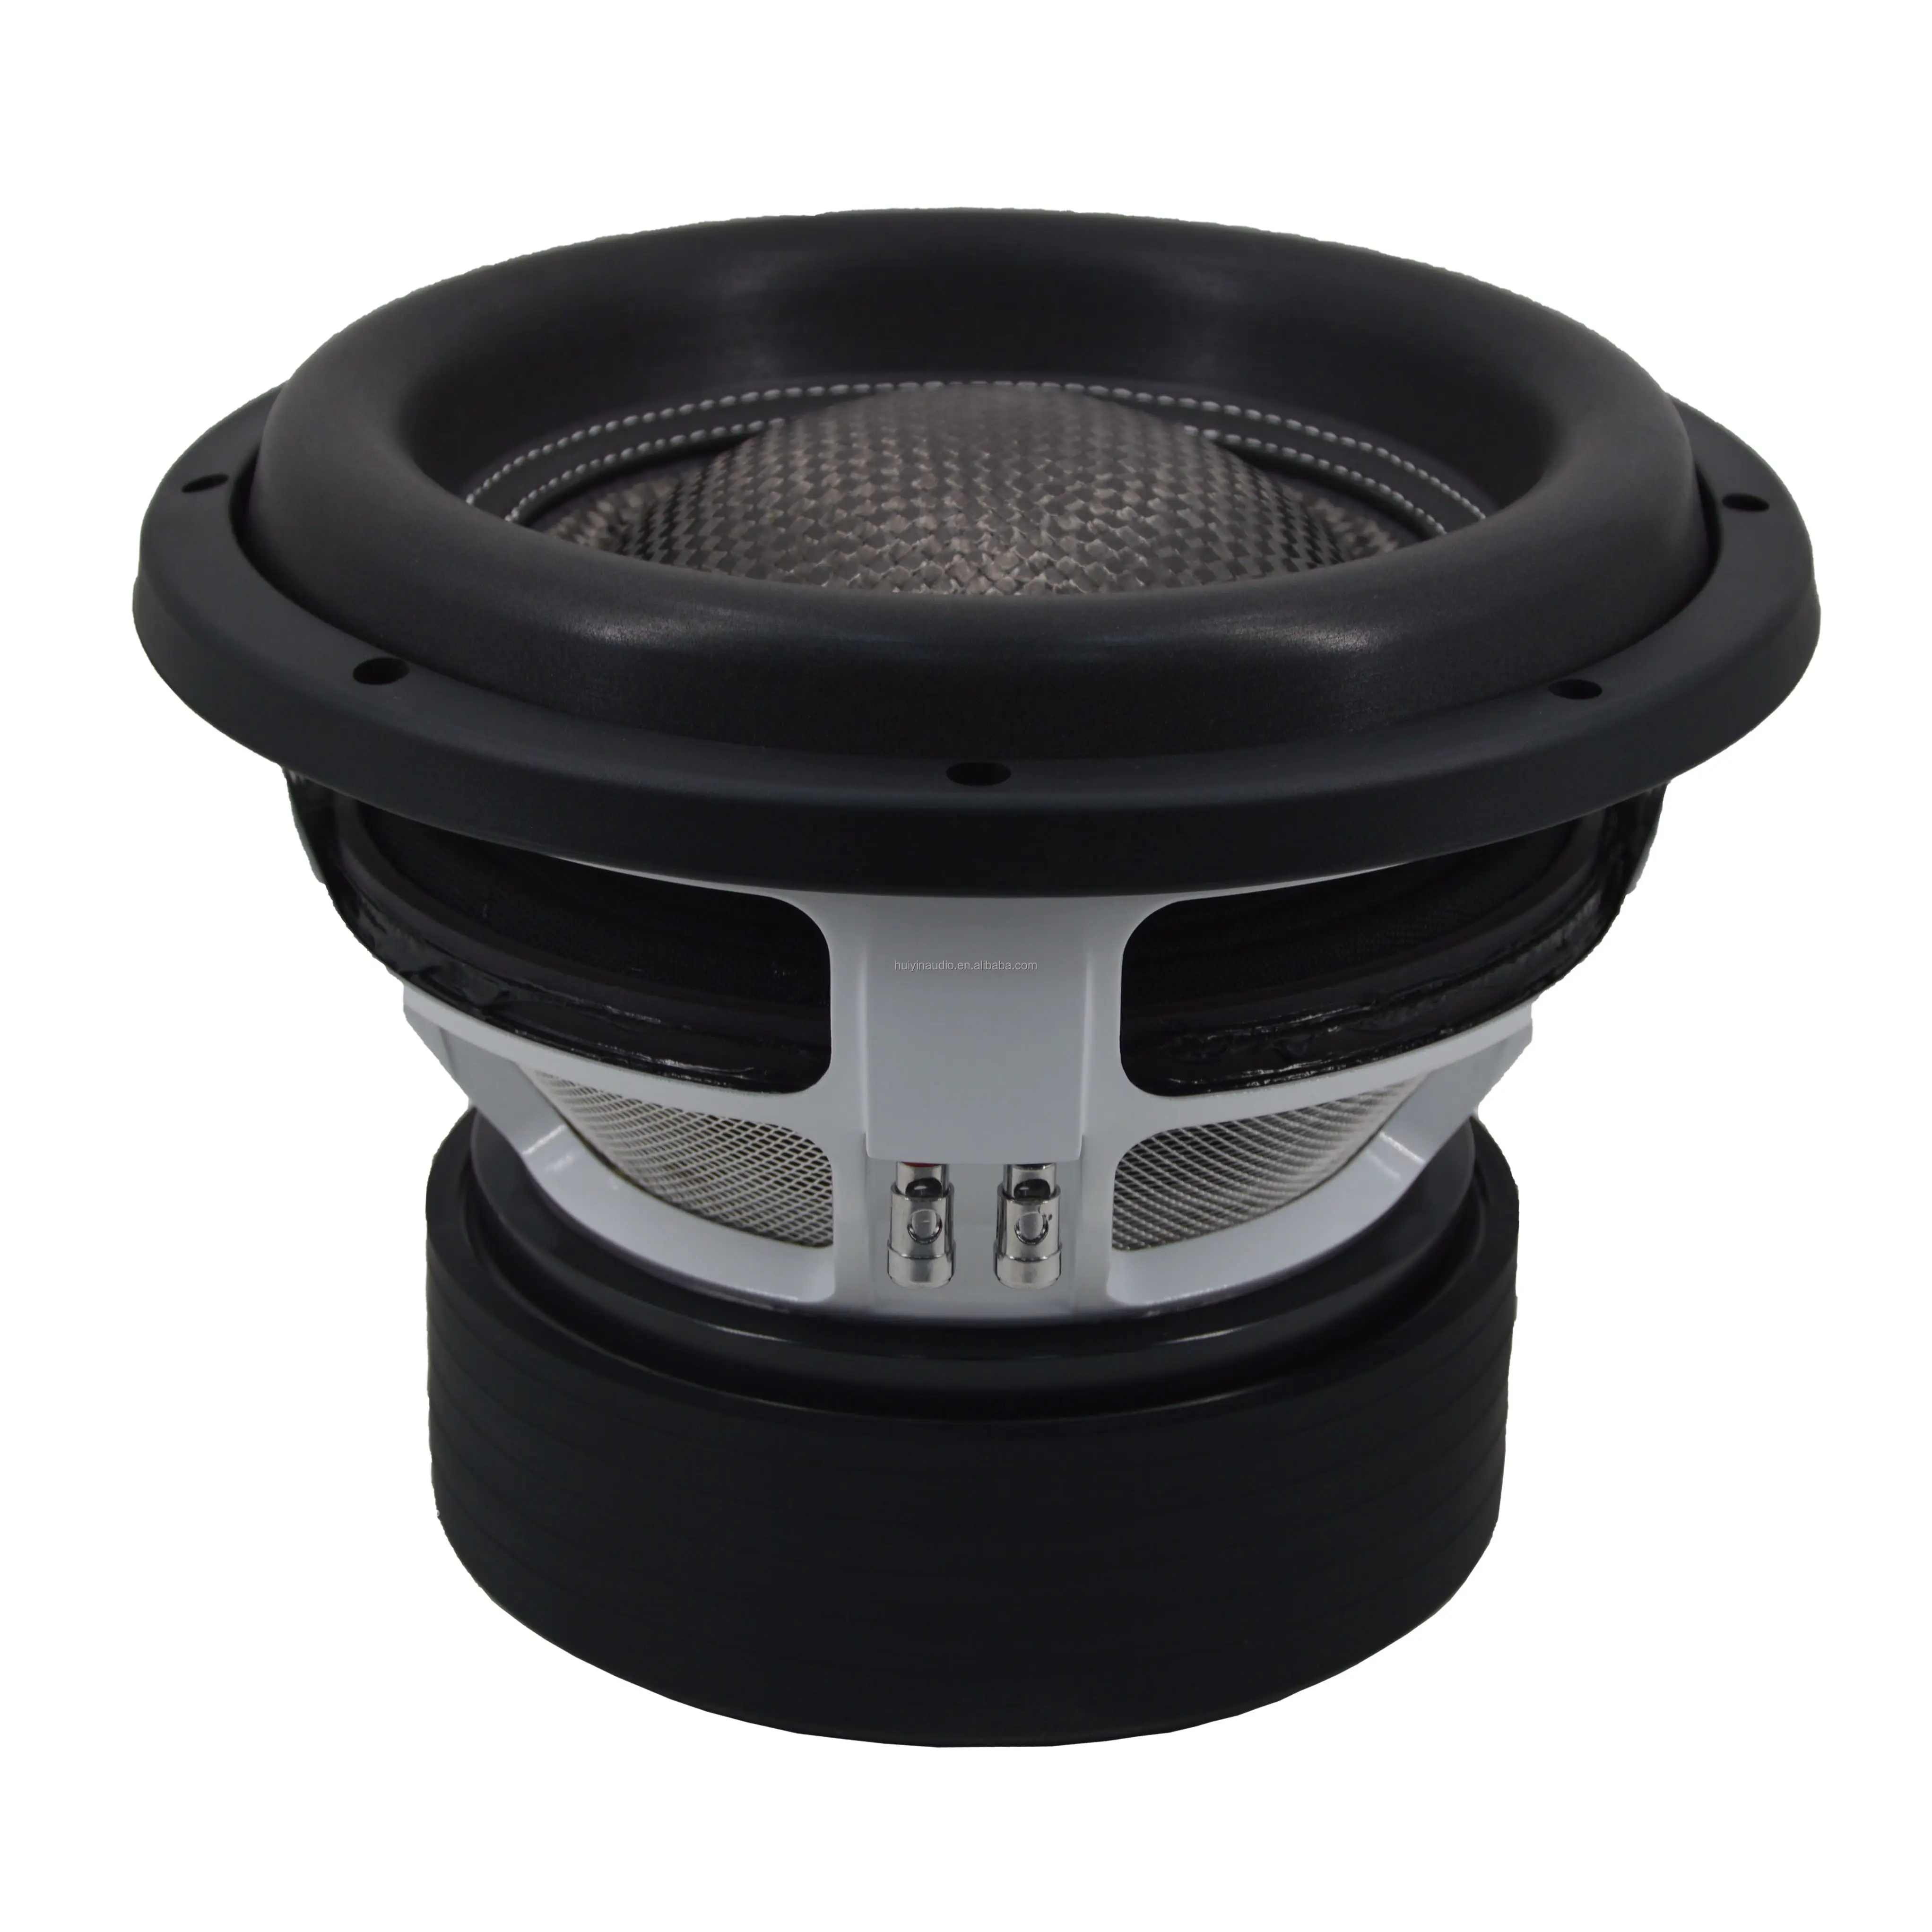 12-Inch Big Power Car Subwoofer 3000W RMS with Dual Voice Coil 4-Inch Diameter Carbon Cone and Aluminium Frame 12V Voltage